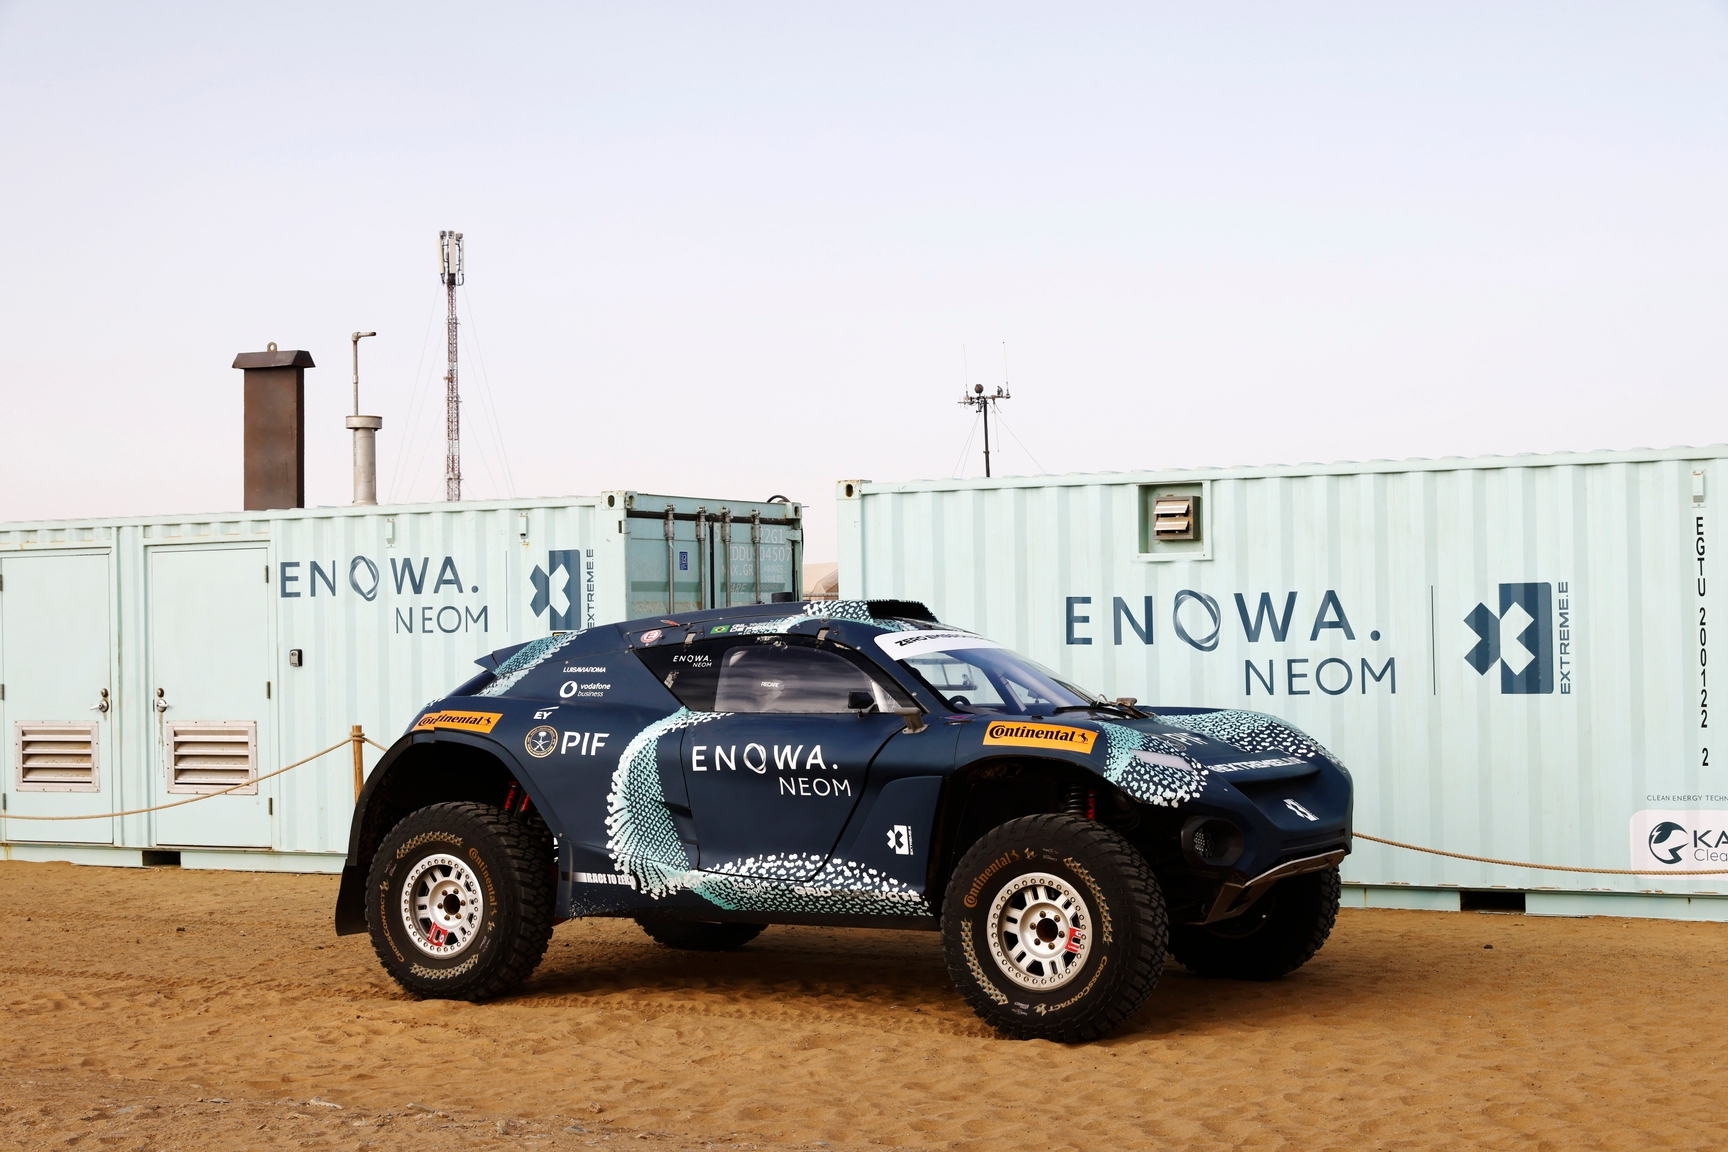 FEBRUARY 16: The Enowa Neom car next to the Enowa Neom fuel cell during the Saudi Arabia on February 16, 2024. (Photo by Andrew Ferraro / LAT Images)